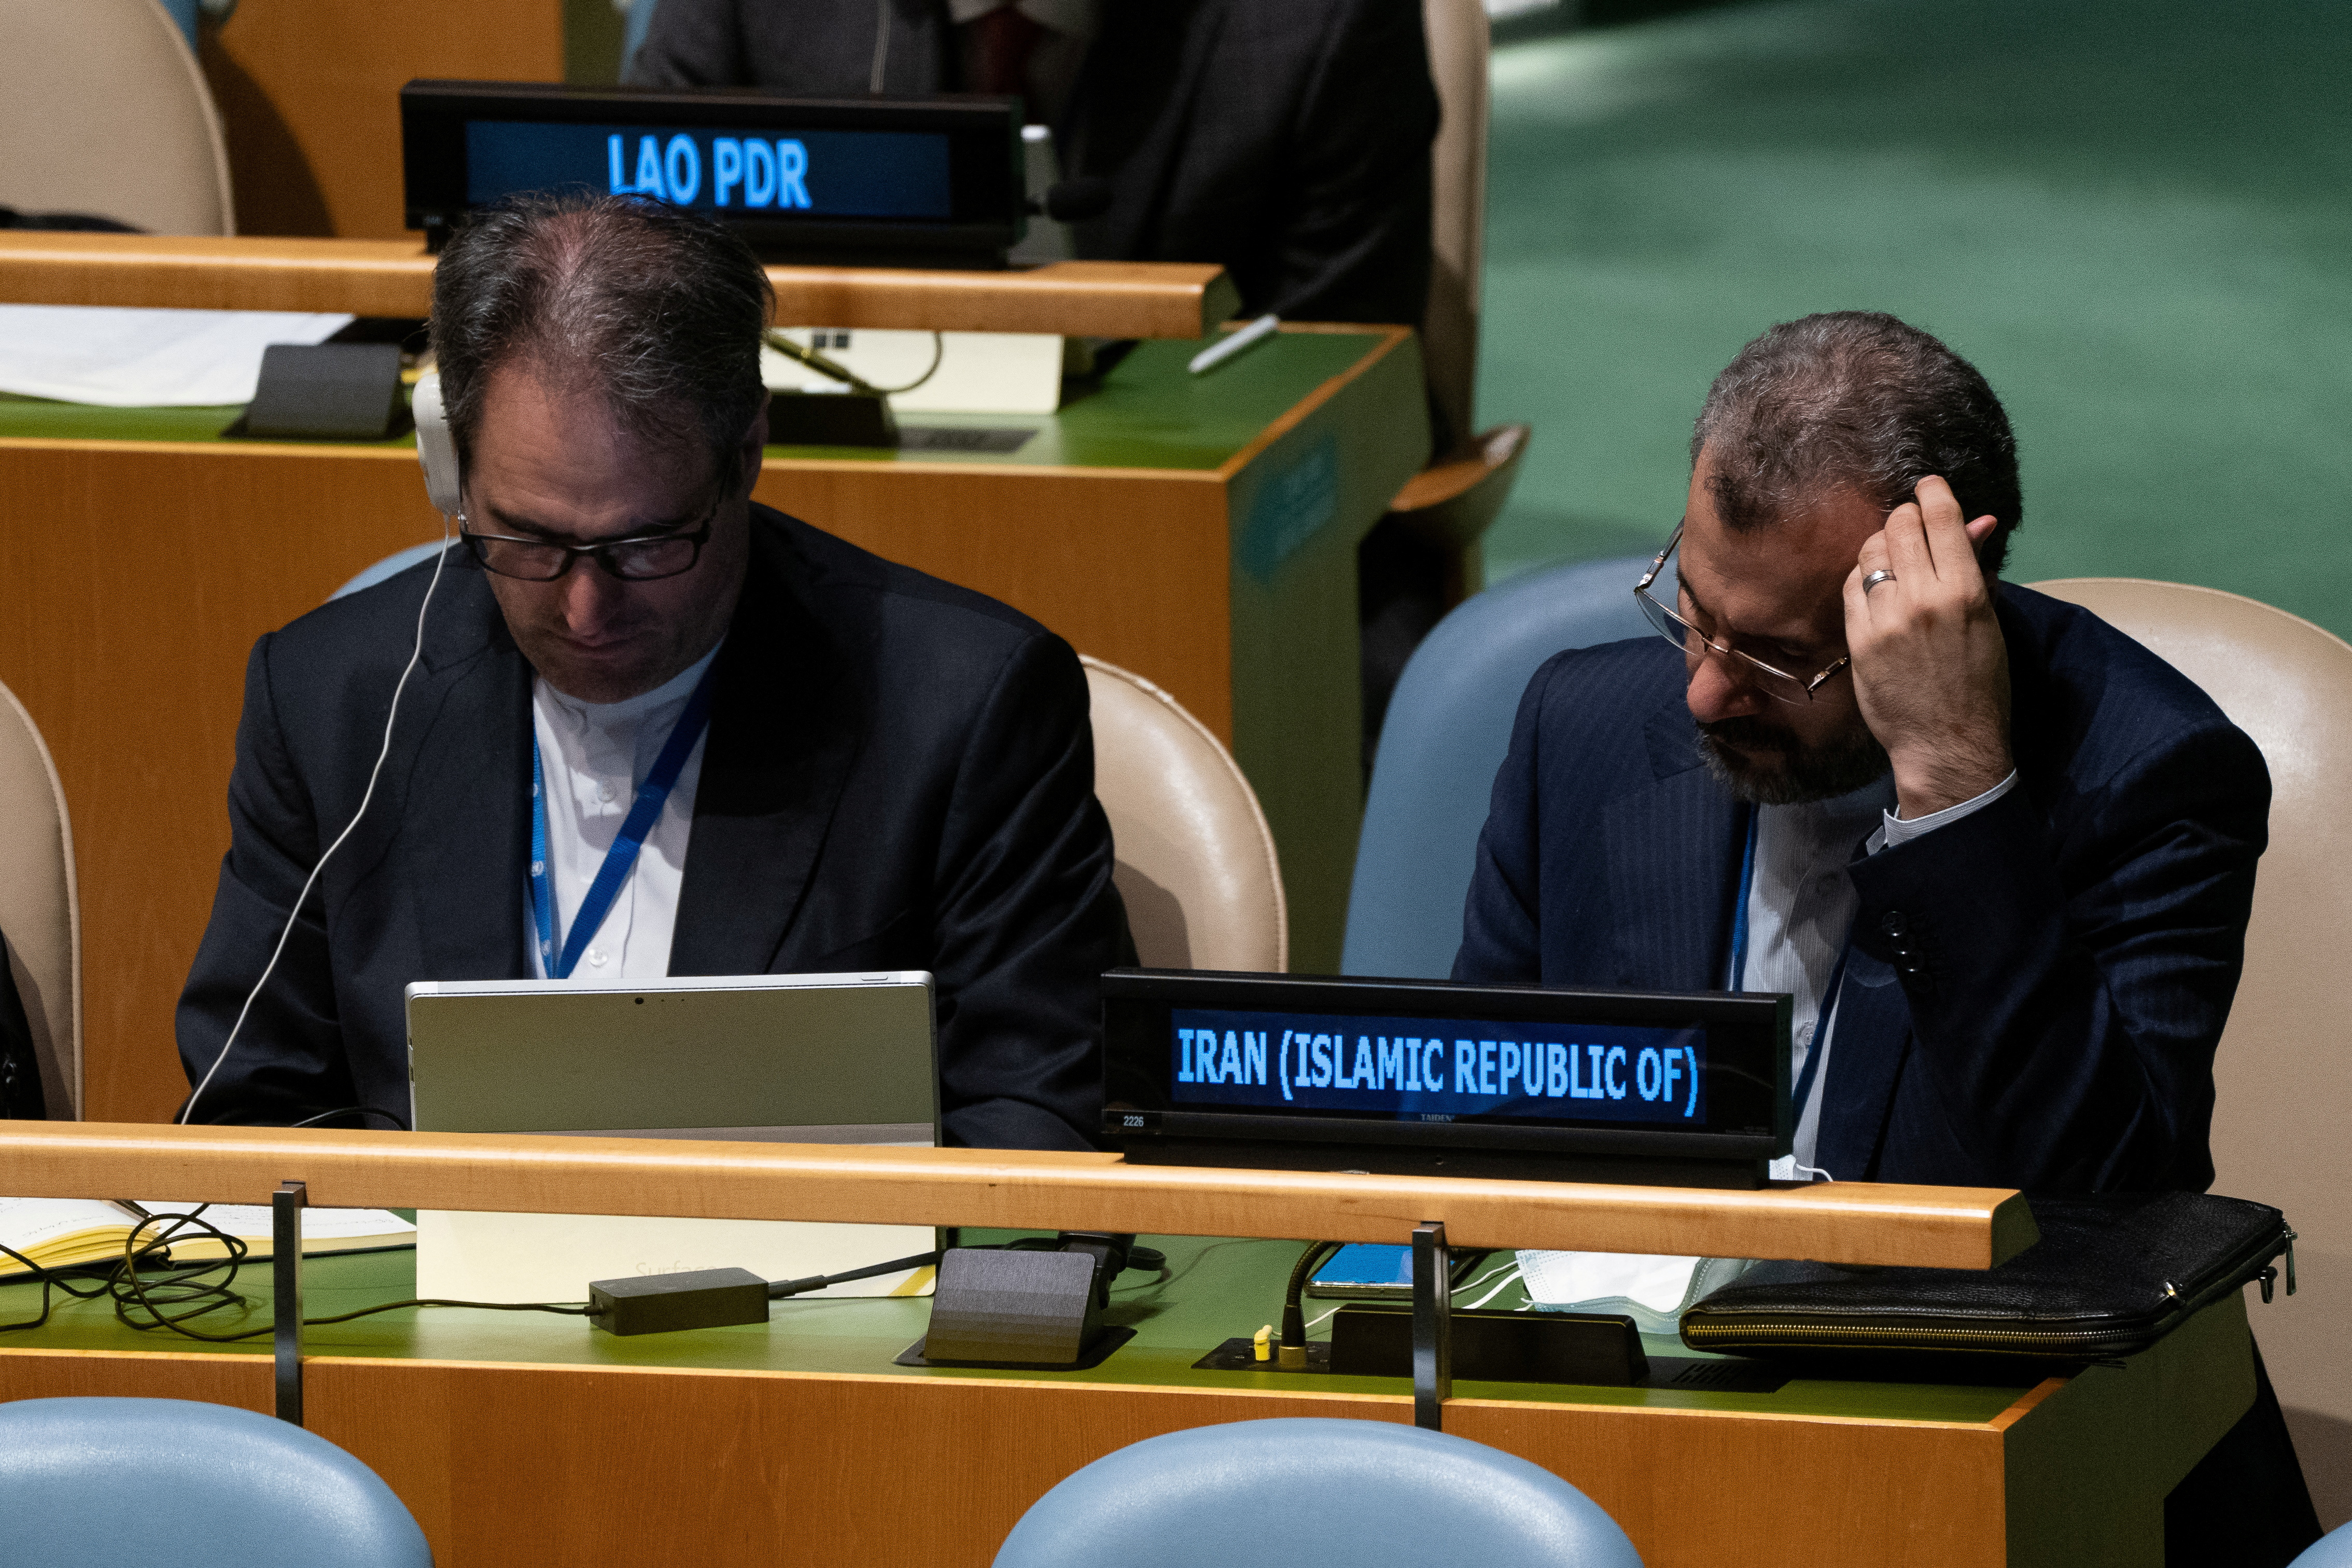 Delegates from Iran Attend the Nuclear Non-Proliferation Treaty Review Conference in New York